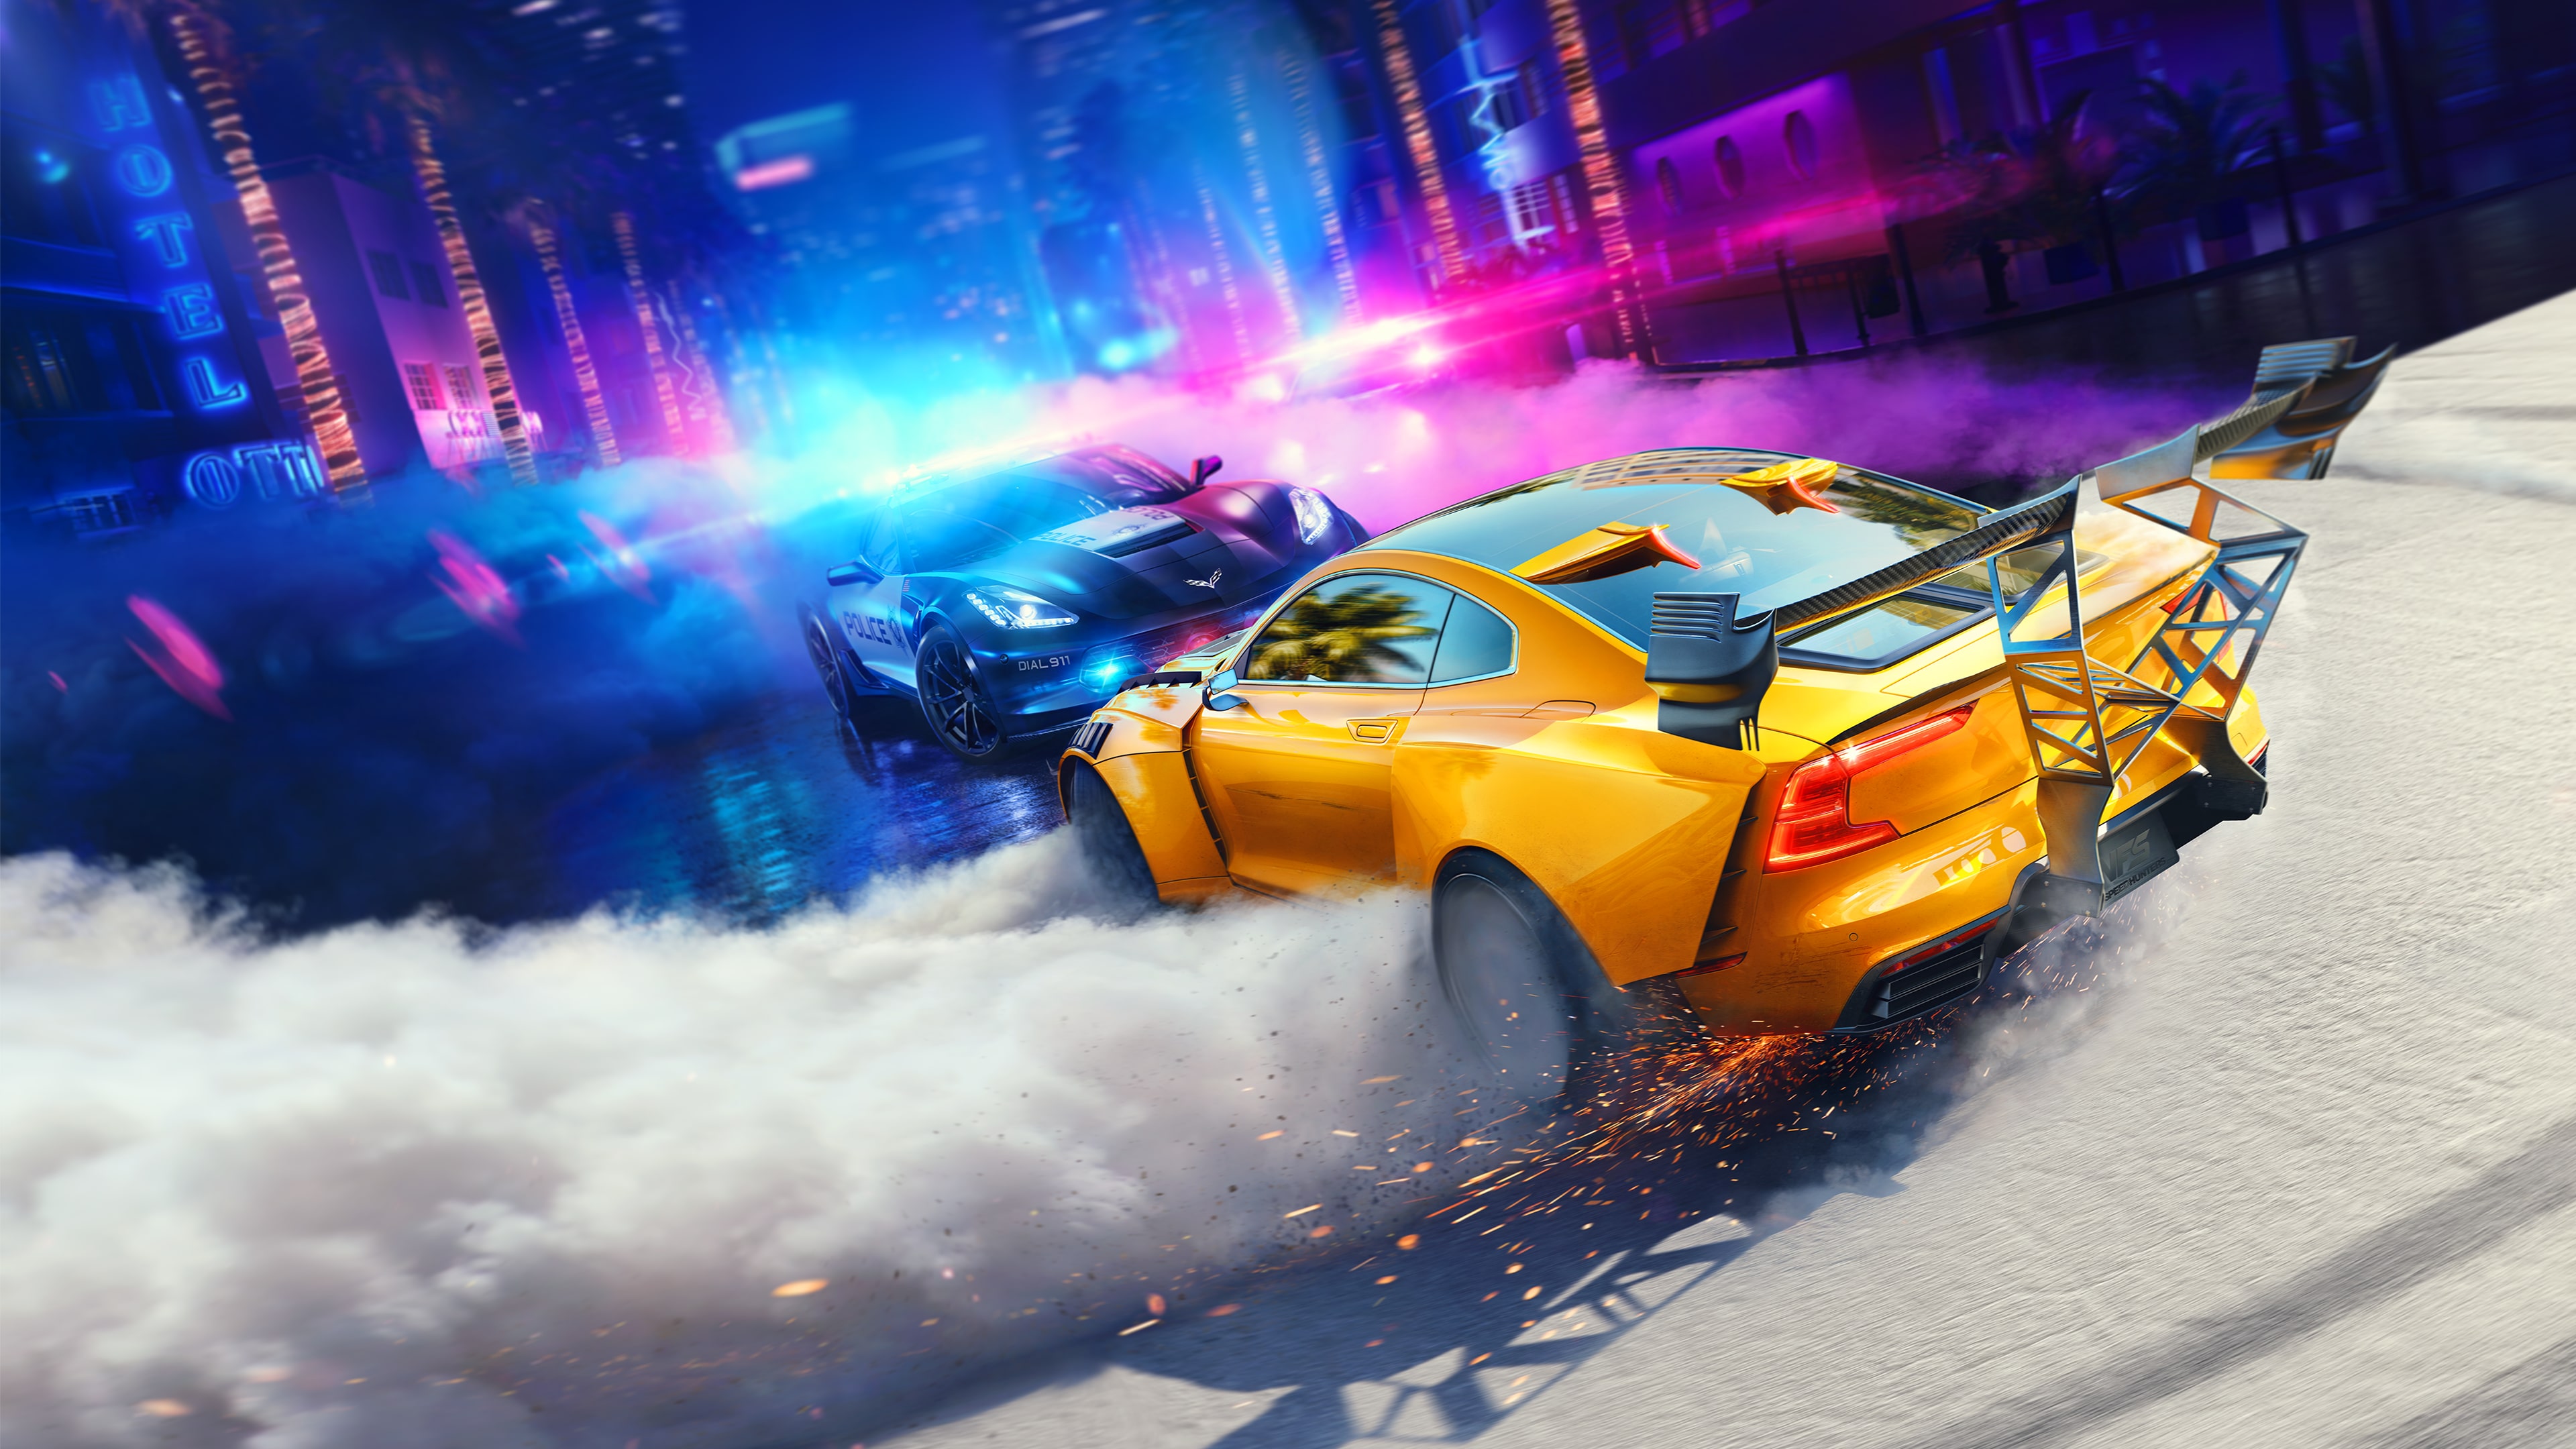 ps now need for speed